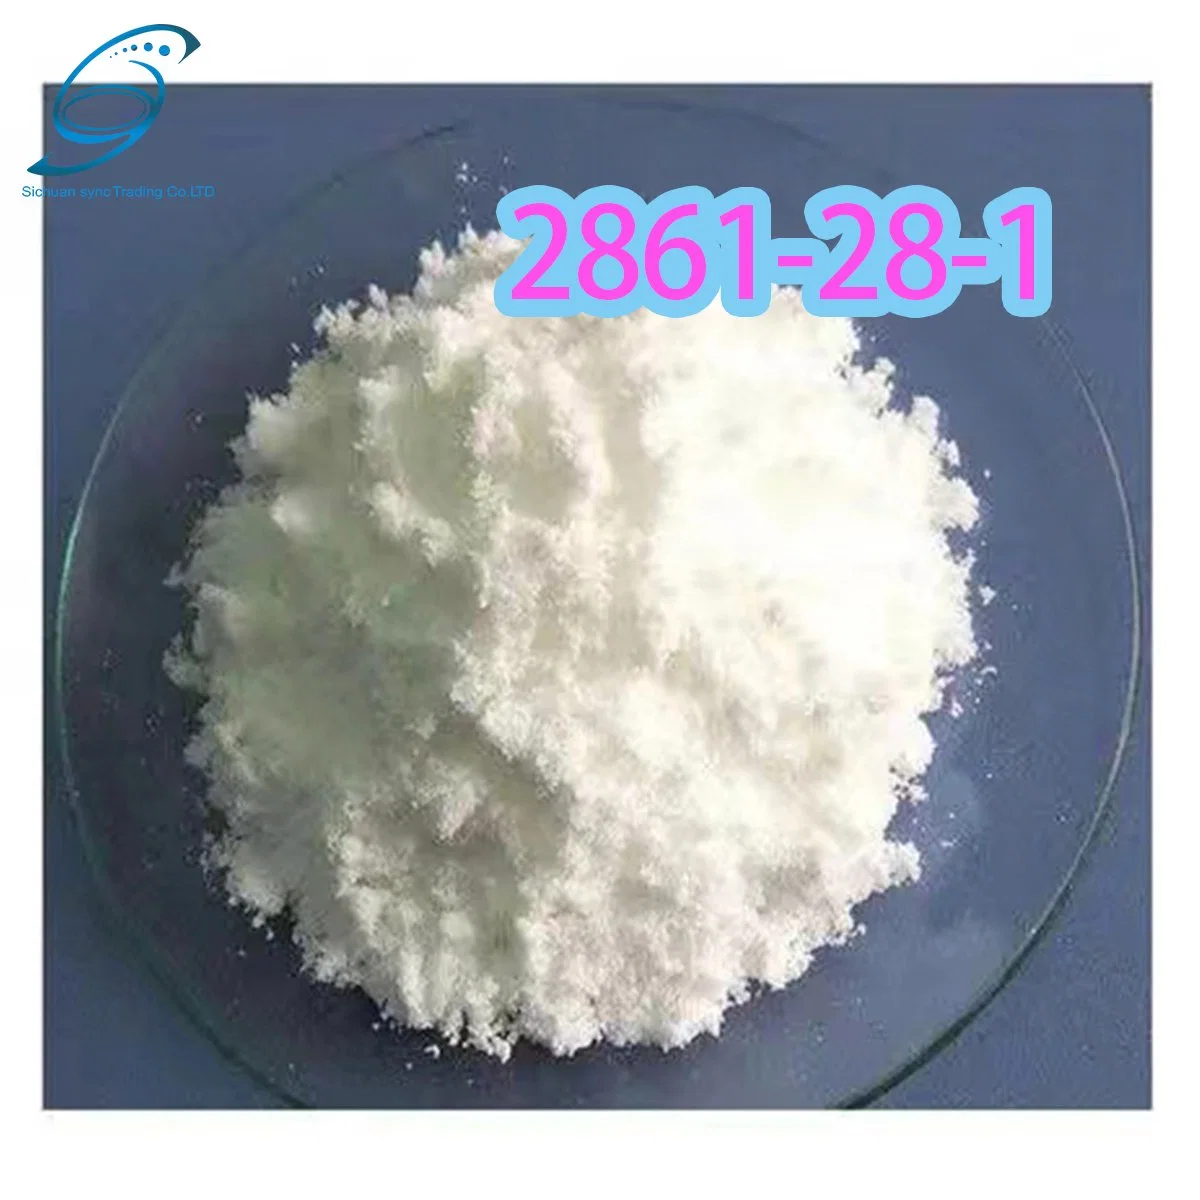 Pharmaceutical Intermediate BMK Pmk China Factory Supply (1, 3-BENZODIOXOL-5-YL) /CAS 2861-28-1/High Quality 2- (1, 3-benzodioxol-5-yl) Acetic Acid ODM